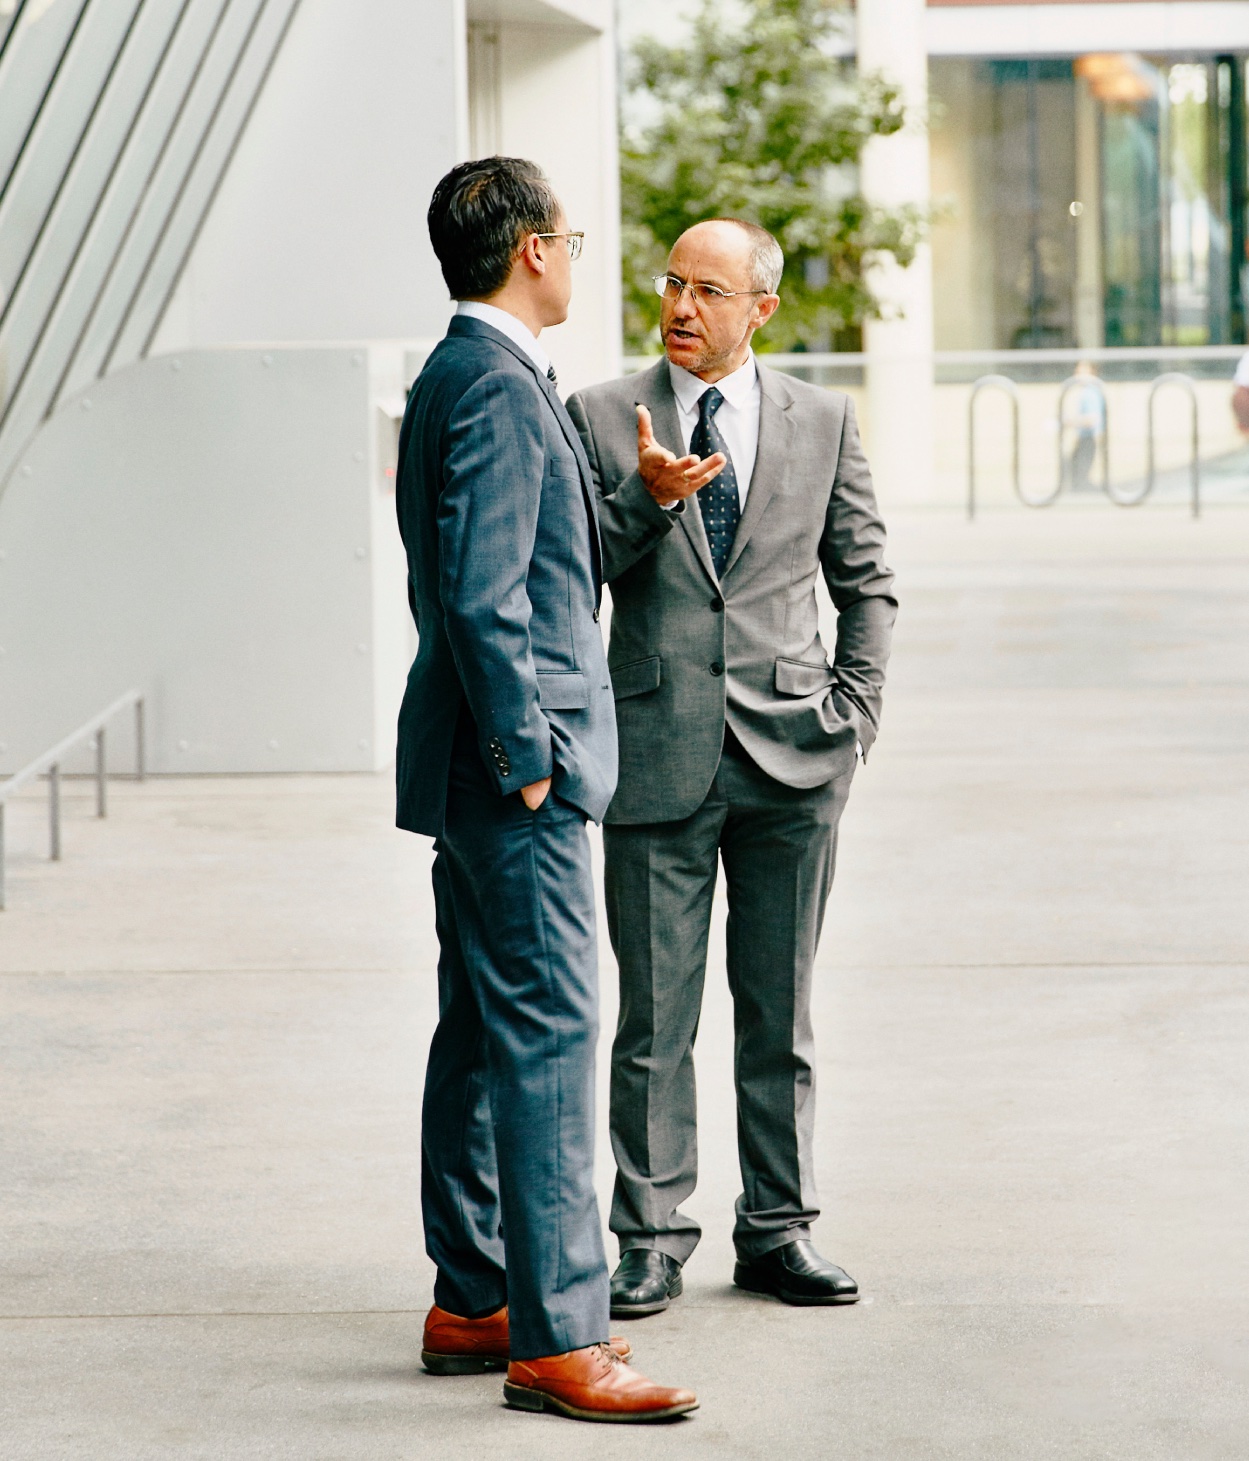 Two businessmen hold a conversation outside of an office building.